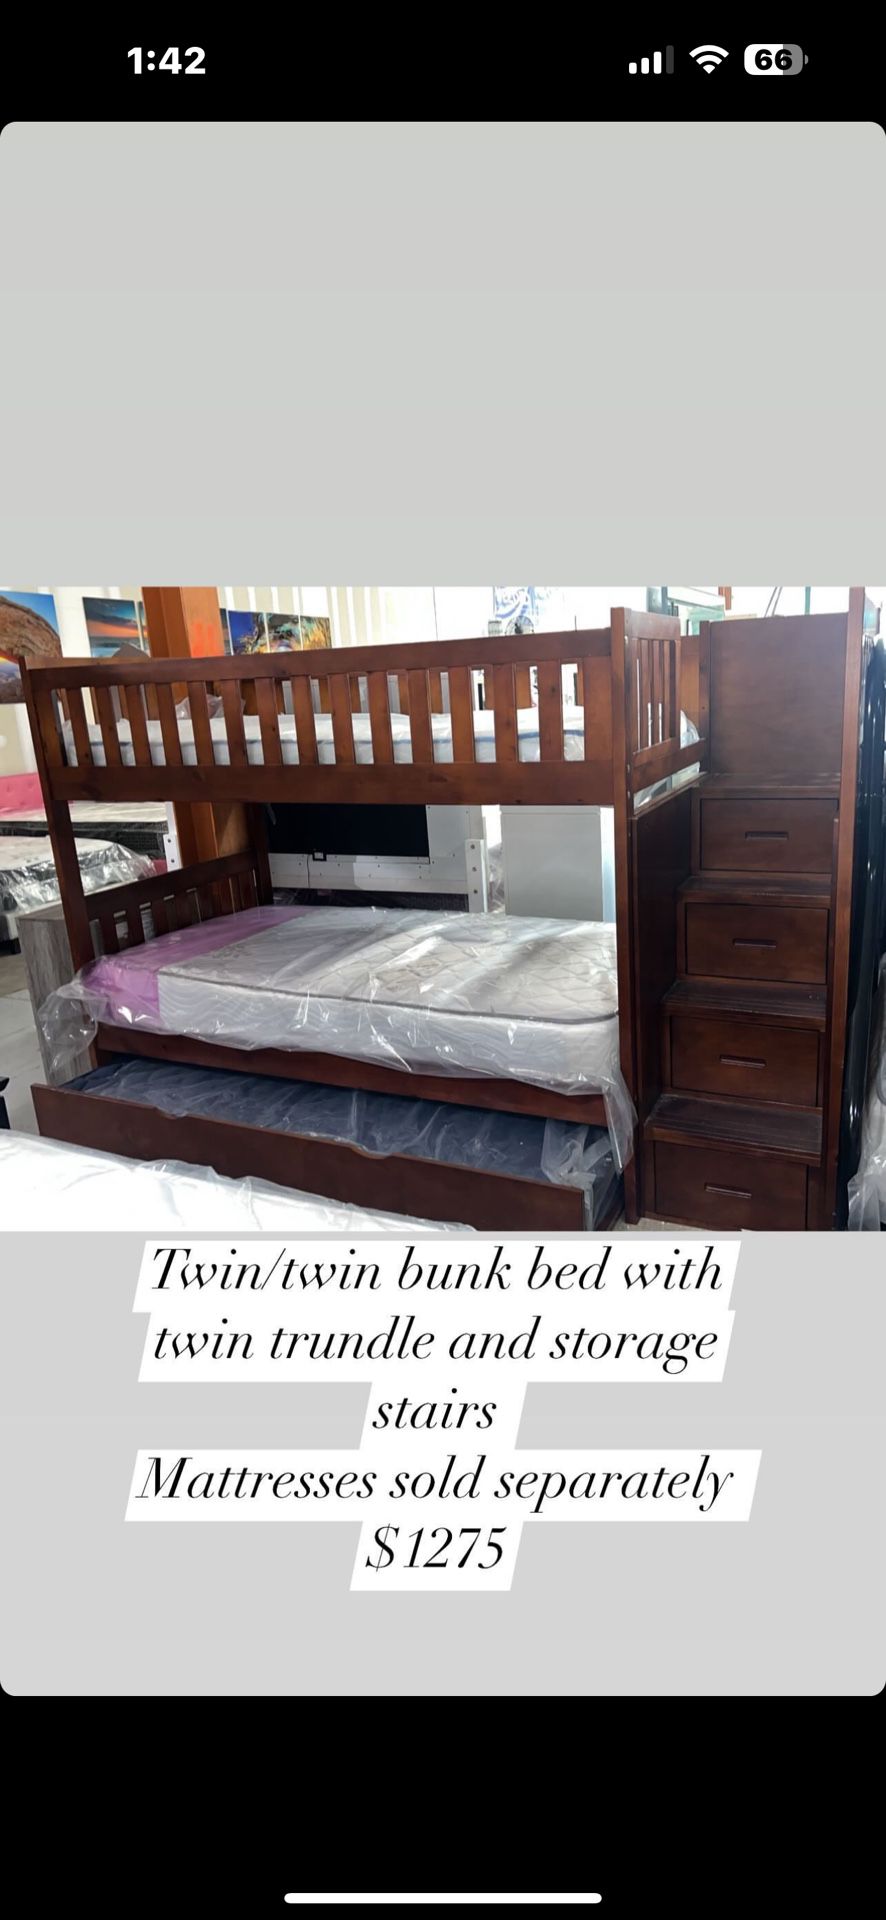 Twin/twin bunk bed with twin trundle and storage stairs Mattresses sold separately $1275